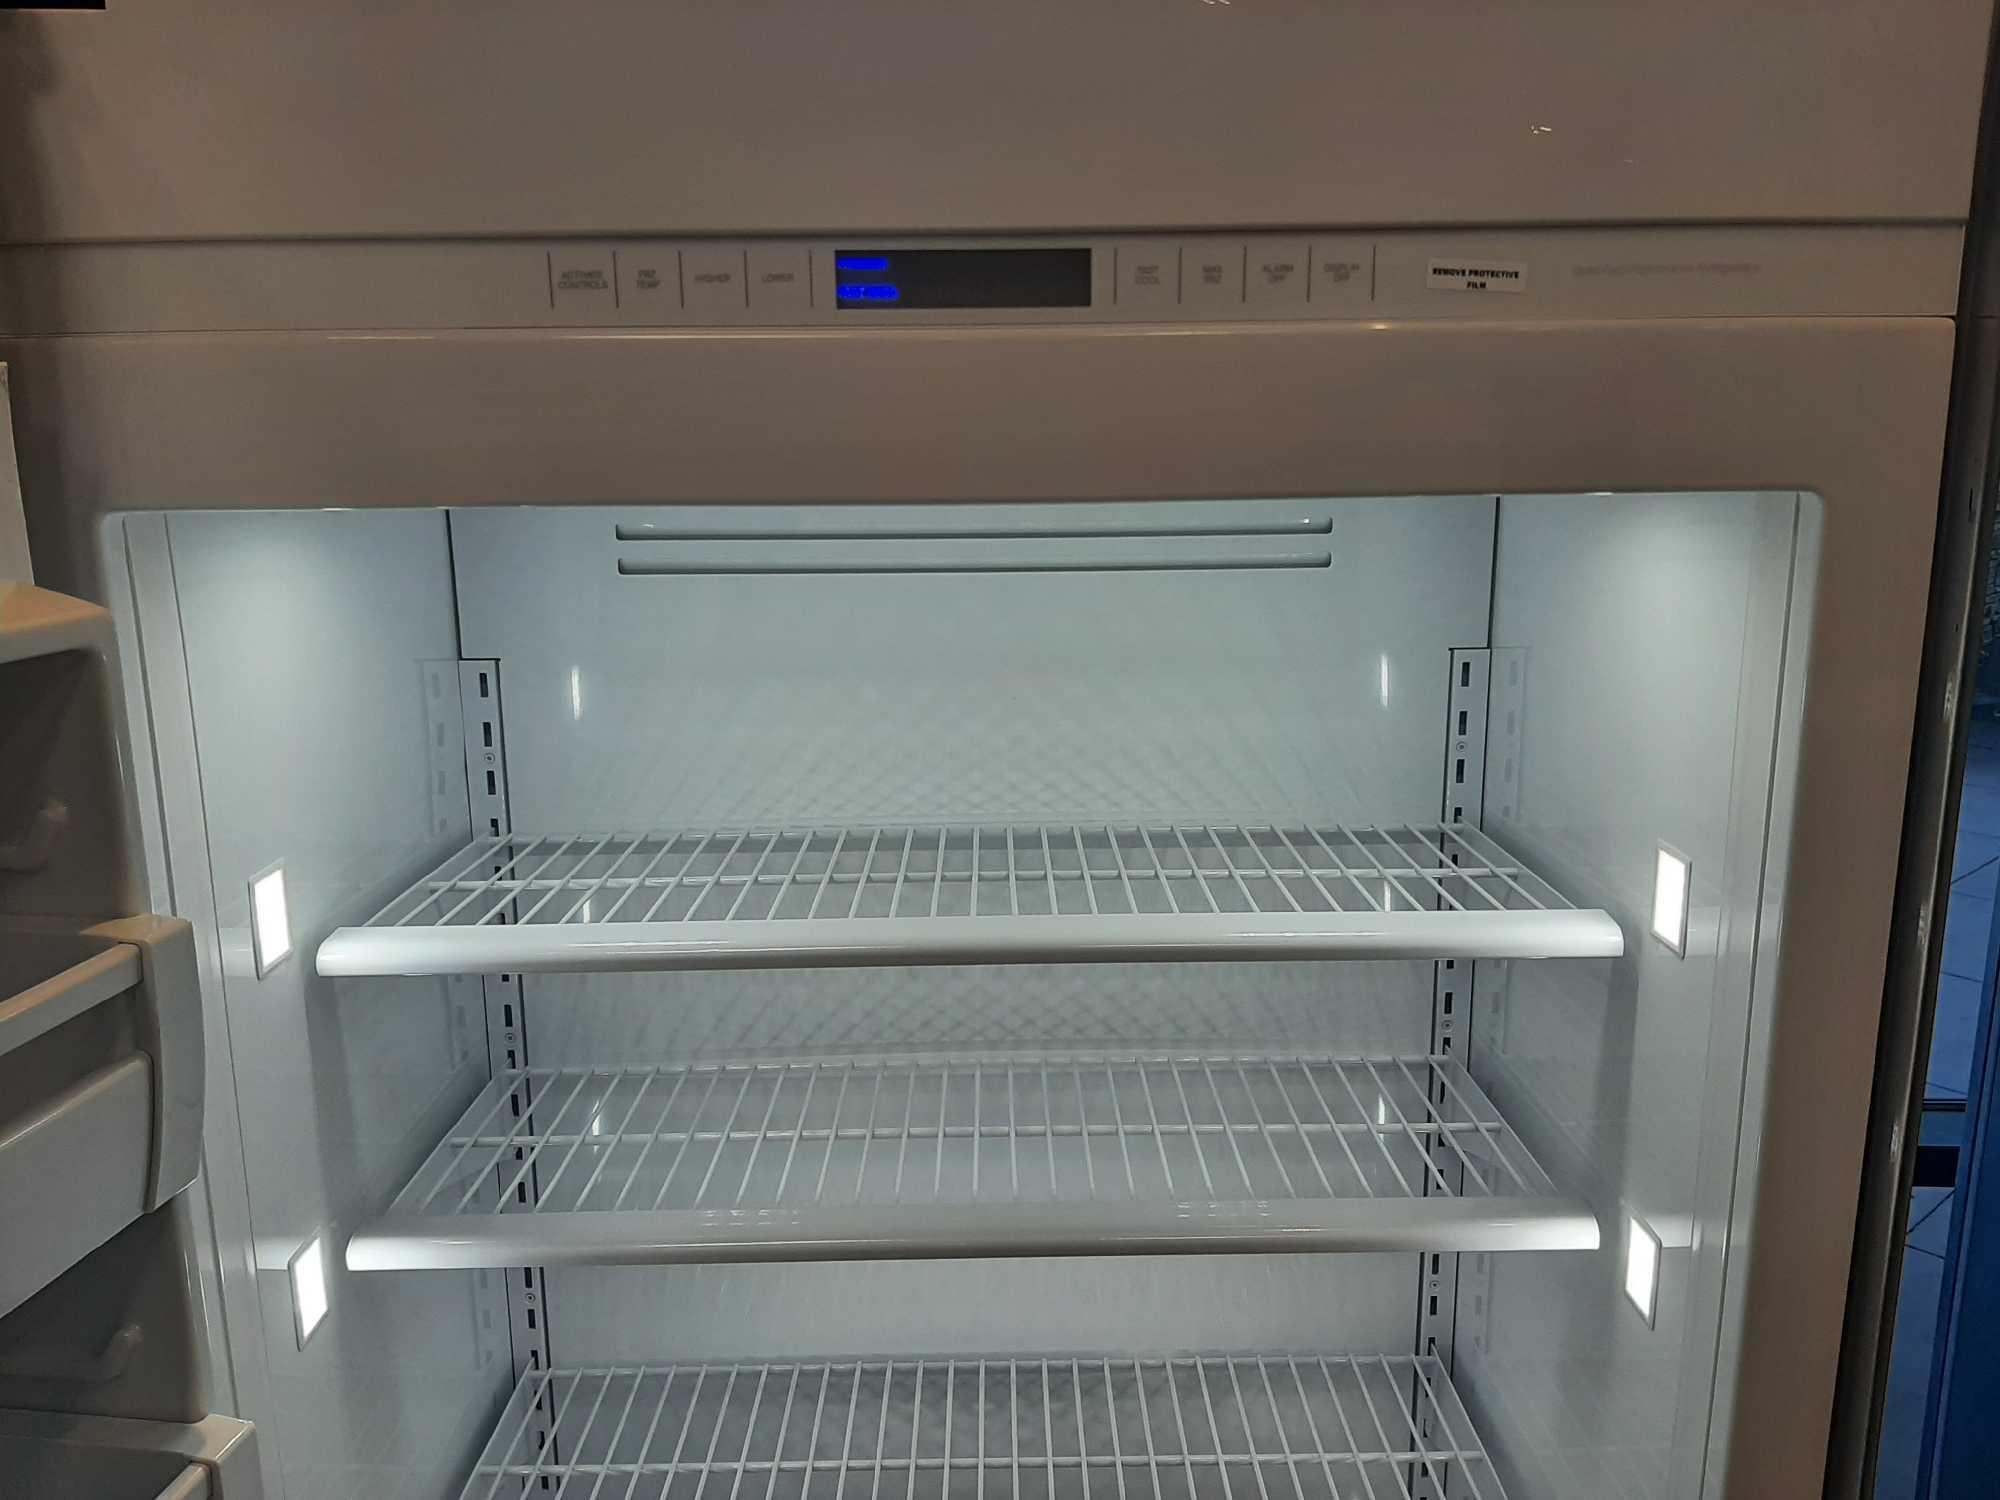 Viking Professional 5 Series Quiet Cool 19.2 Cu. Ft. Upright Freezer*COLD*PREVIOUSLY INSTALLED*